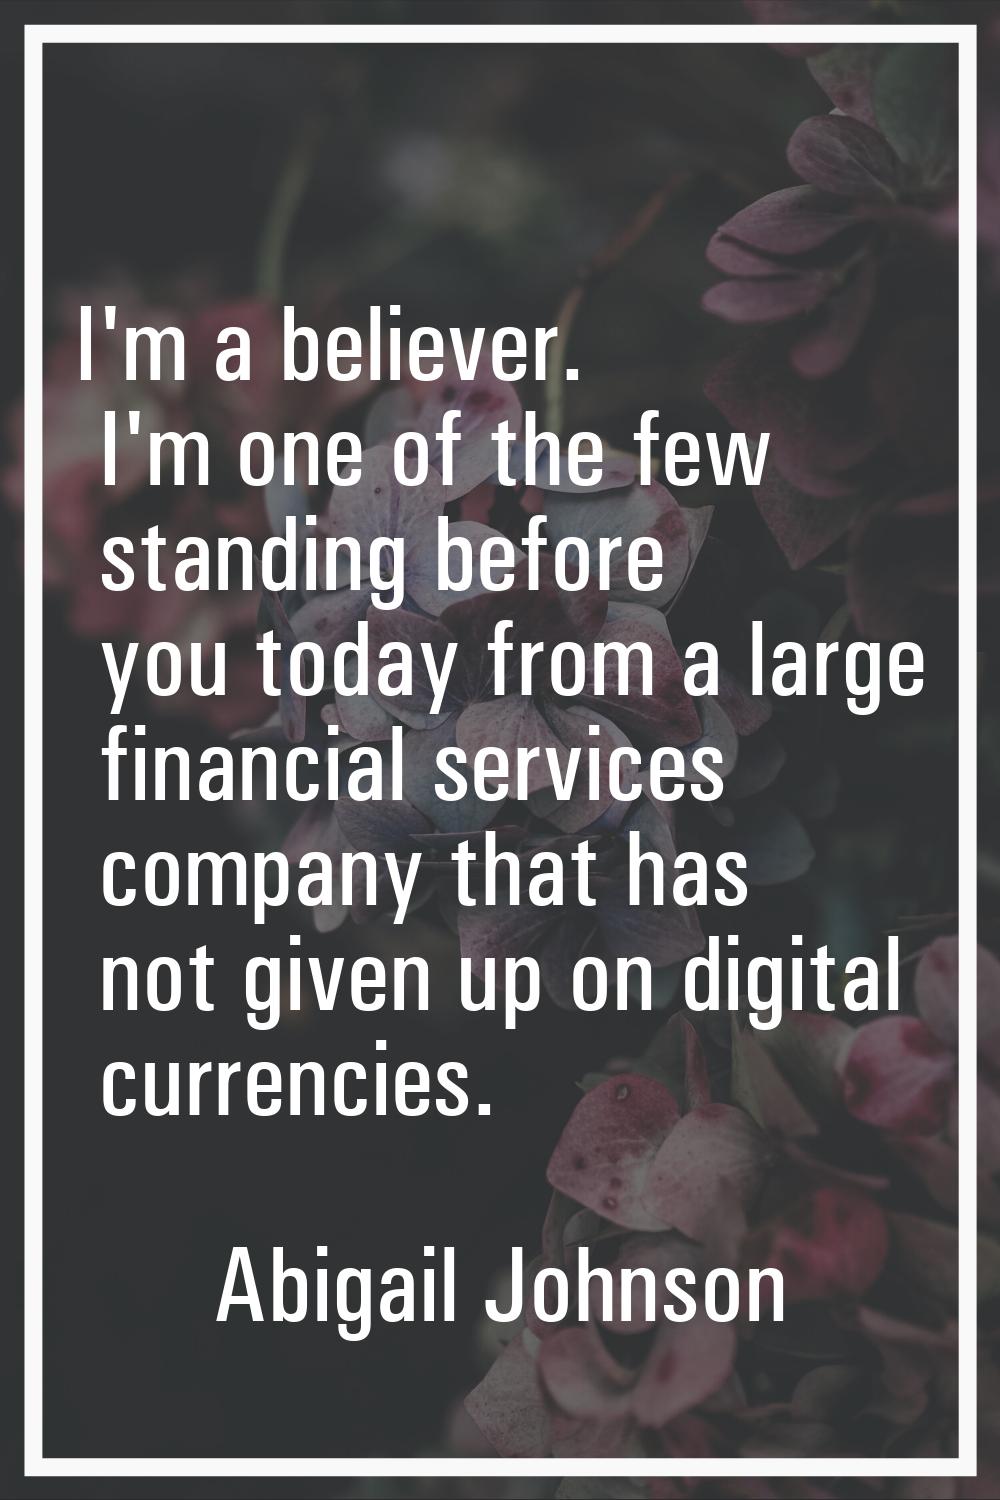 I'm a believer. I'm one of the few standing before you today from a large financial services compan